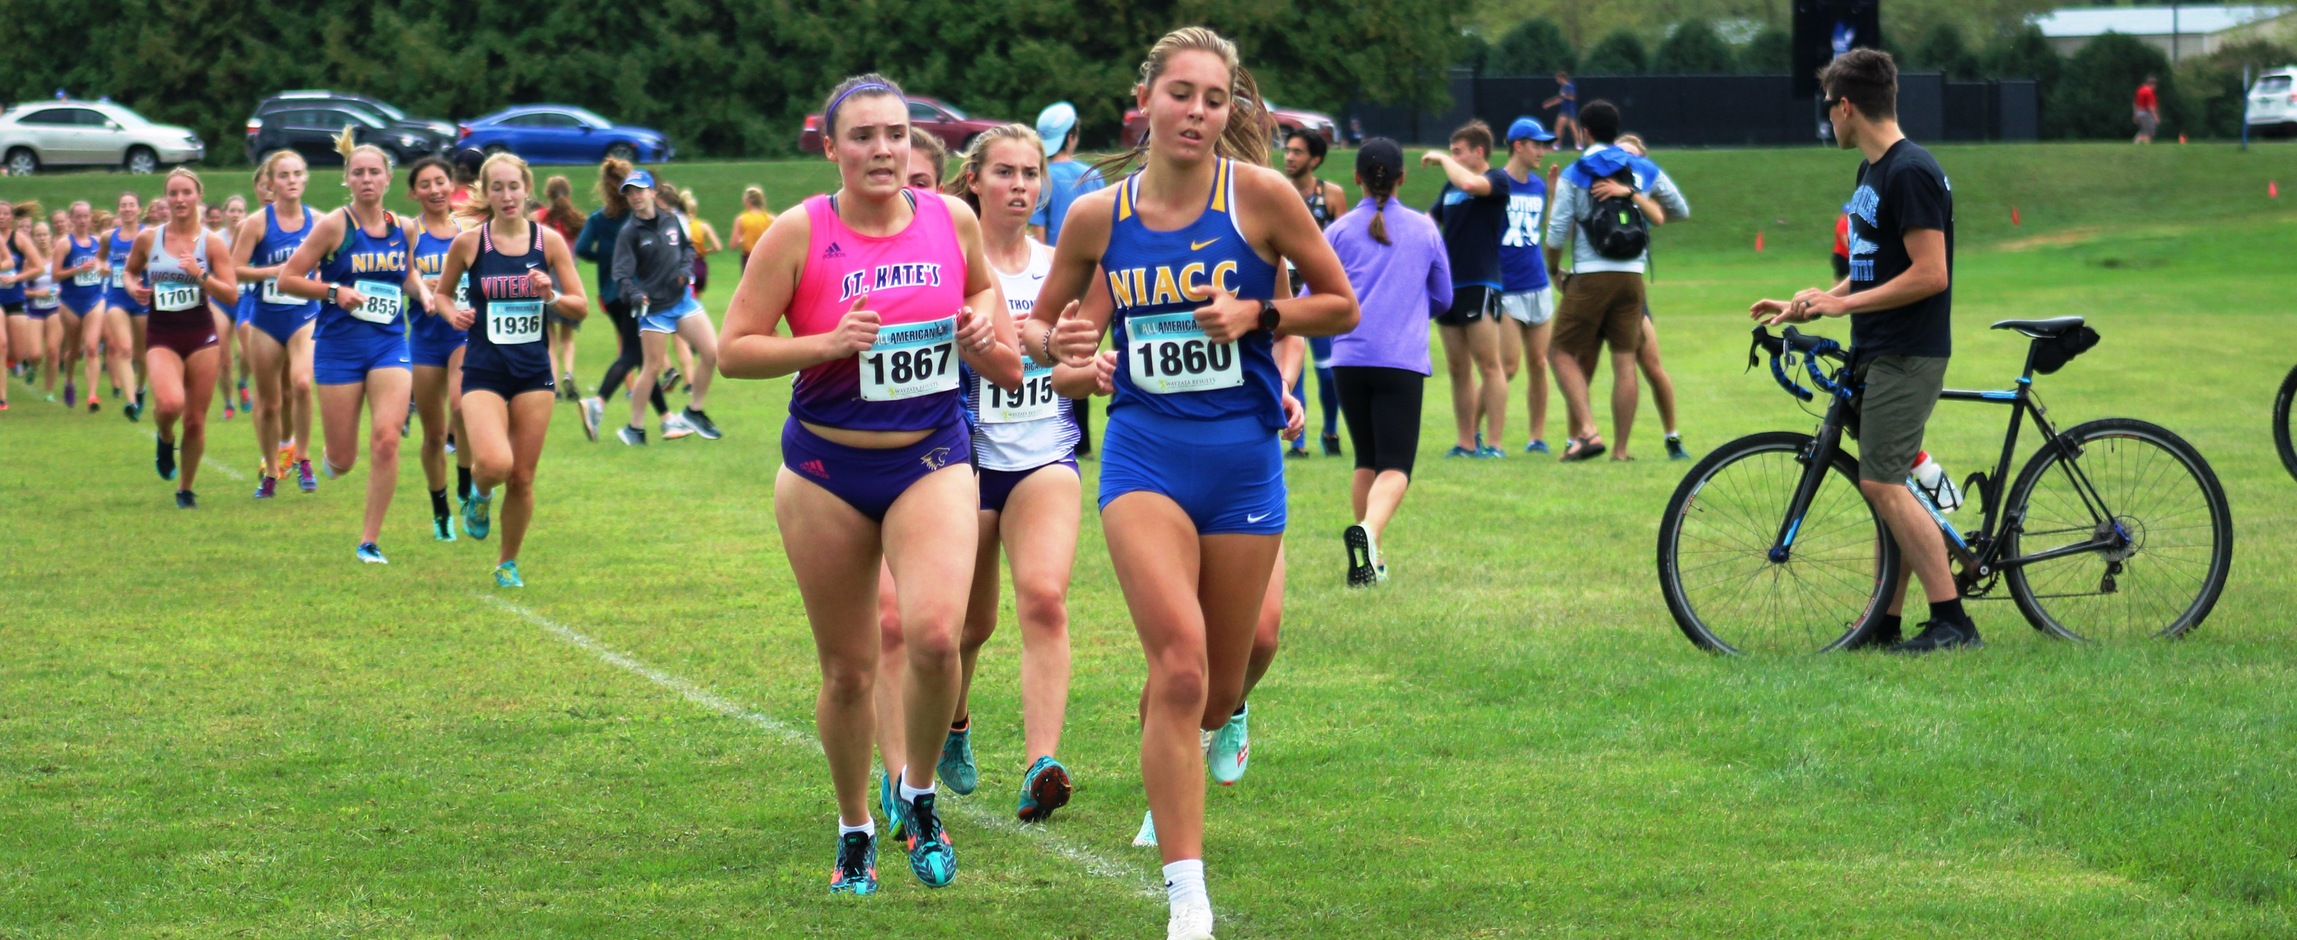 NIACC's Whitney Martin runs at the Luther College All-American meet earlier this season.